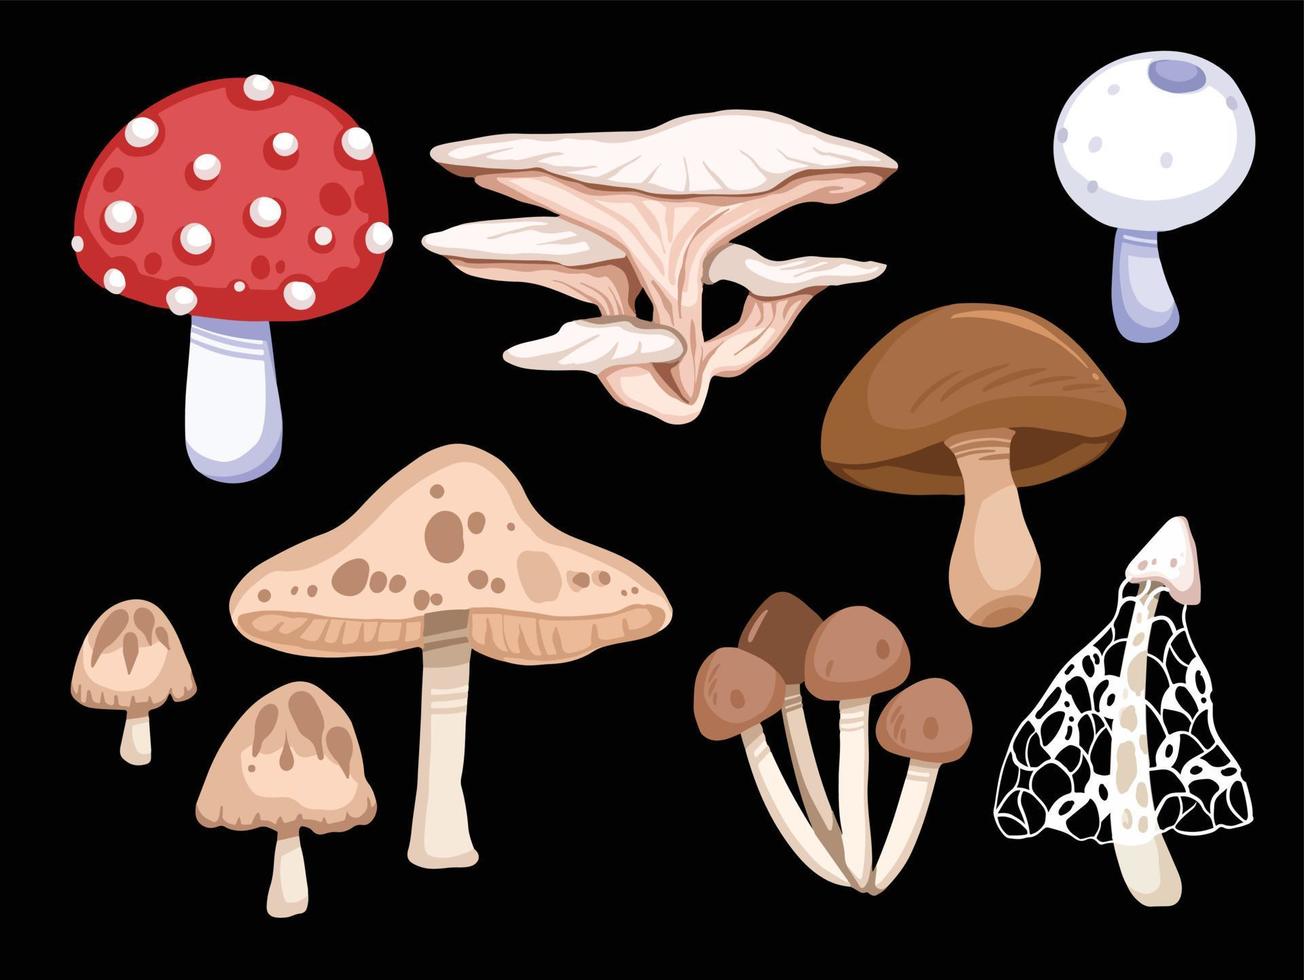 Set of cartoon flat art style drawing vector illustration. Wild mushrooms, some can be eaten and some are toxic and dangerous.